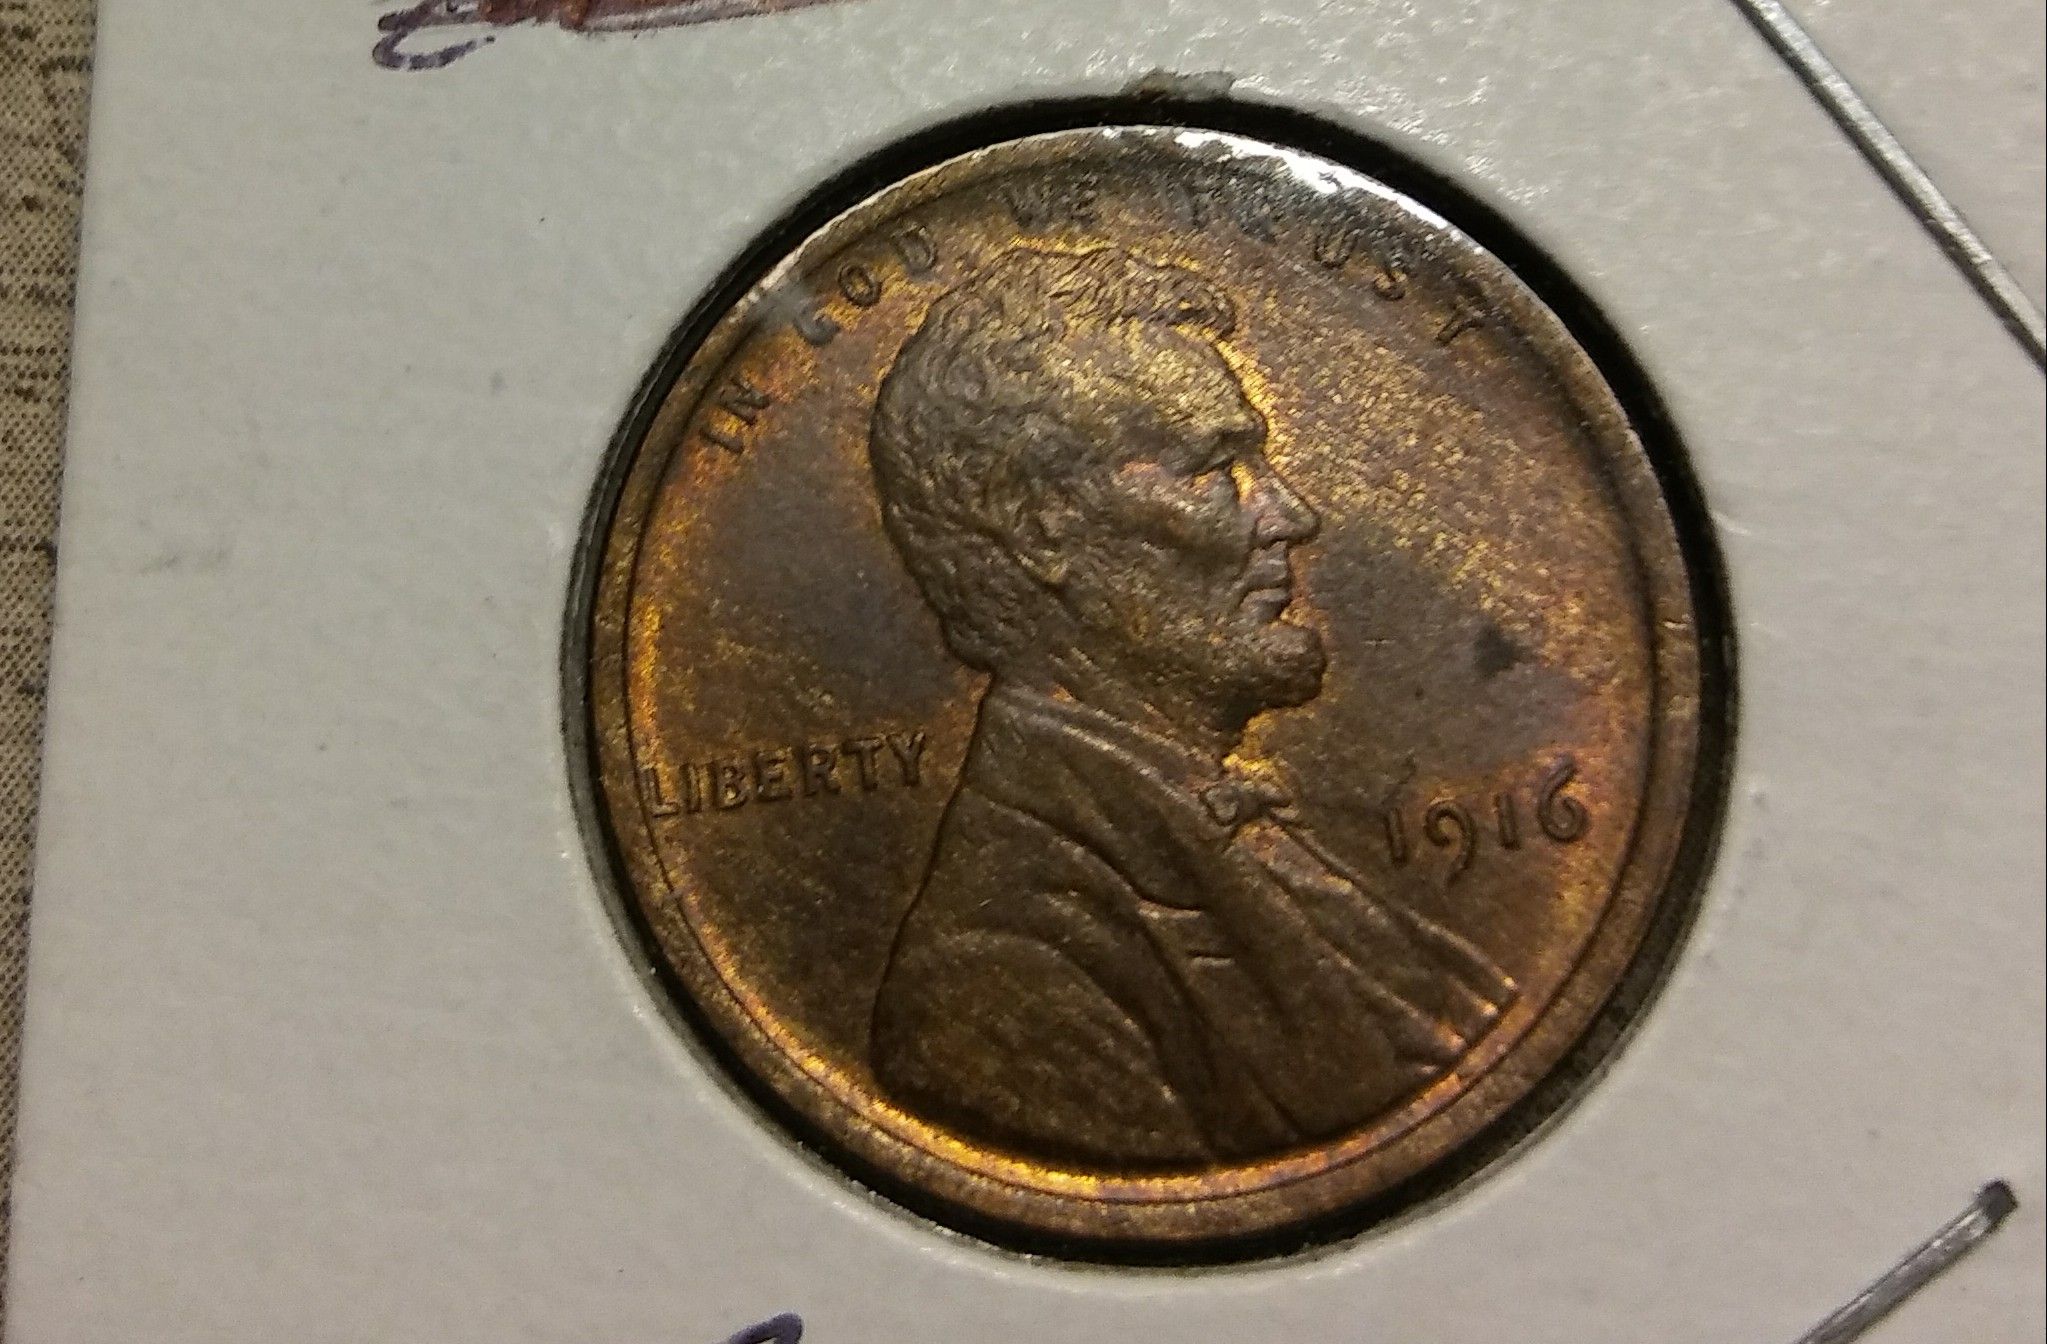 Beautiful Toning mint luster 1916 MS 65 RB Lincoln 1 Cent